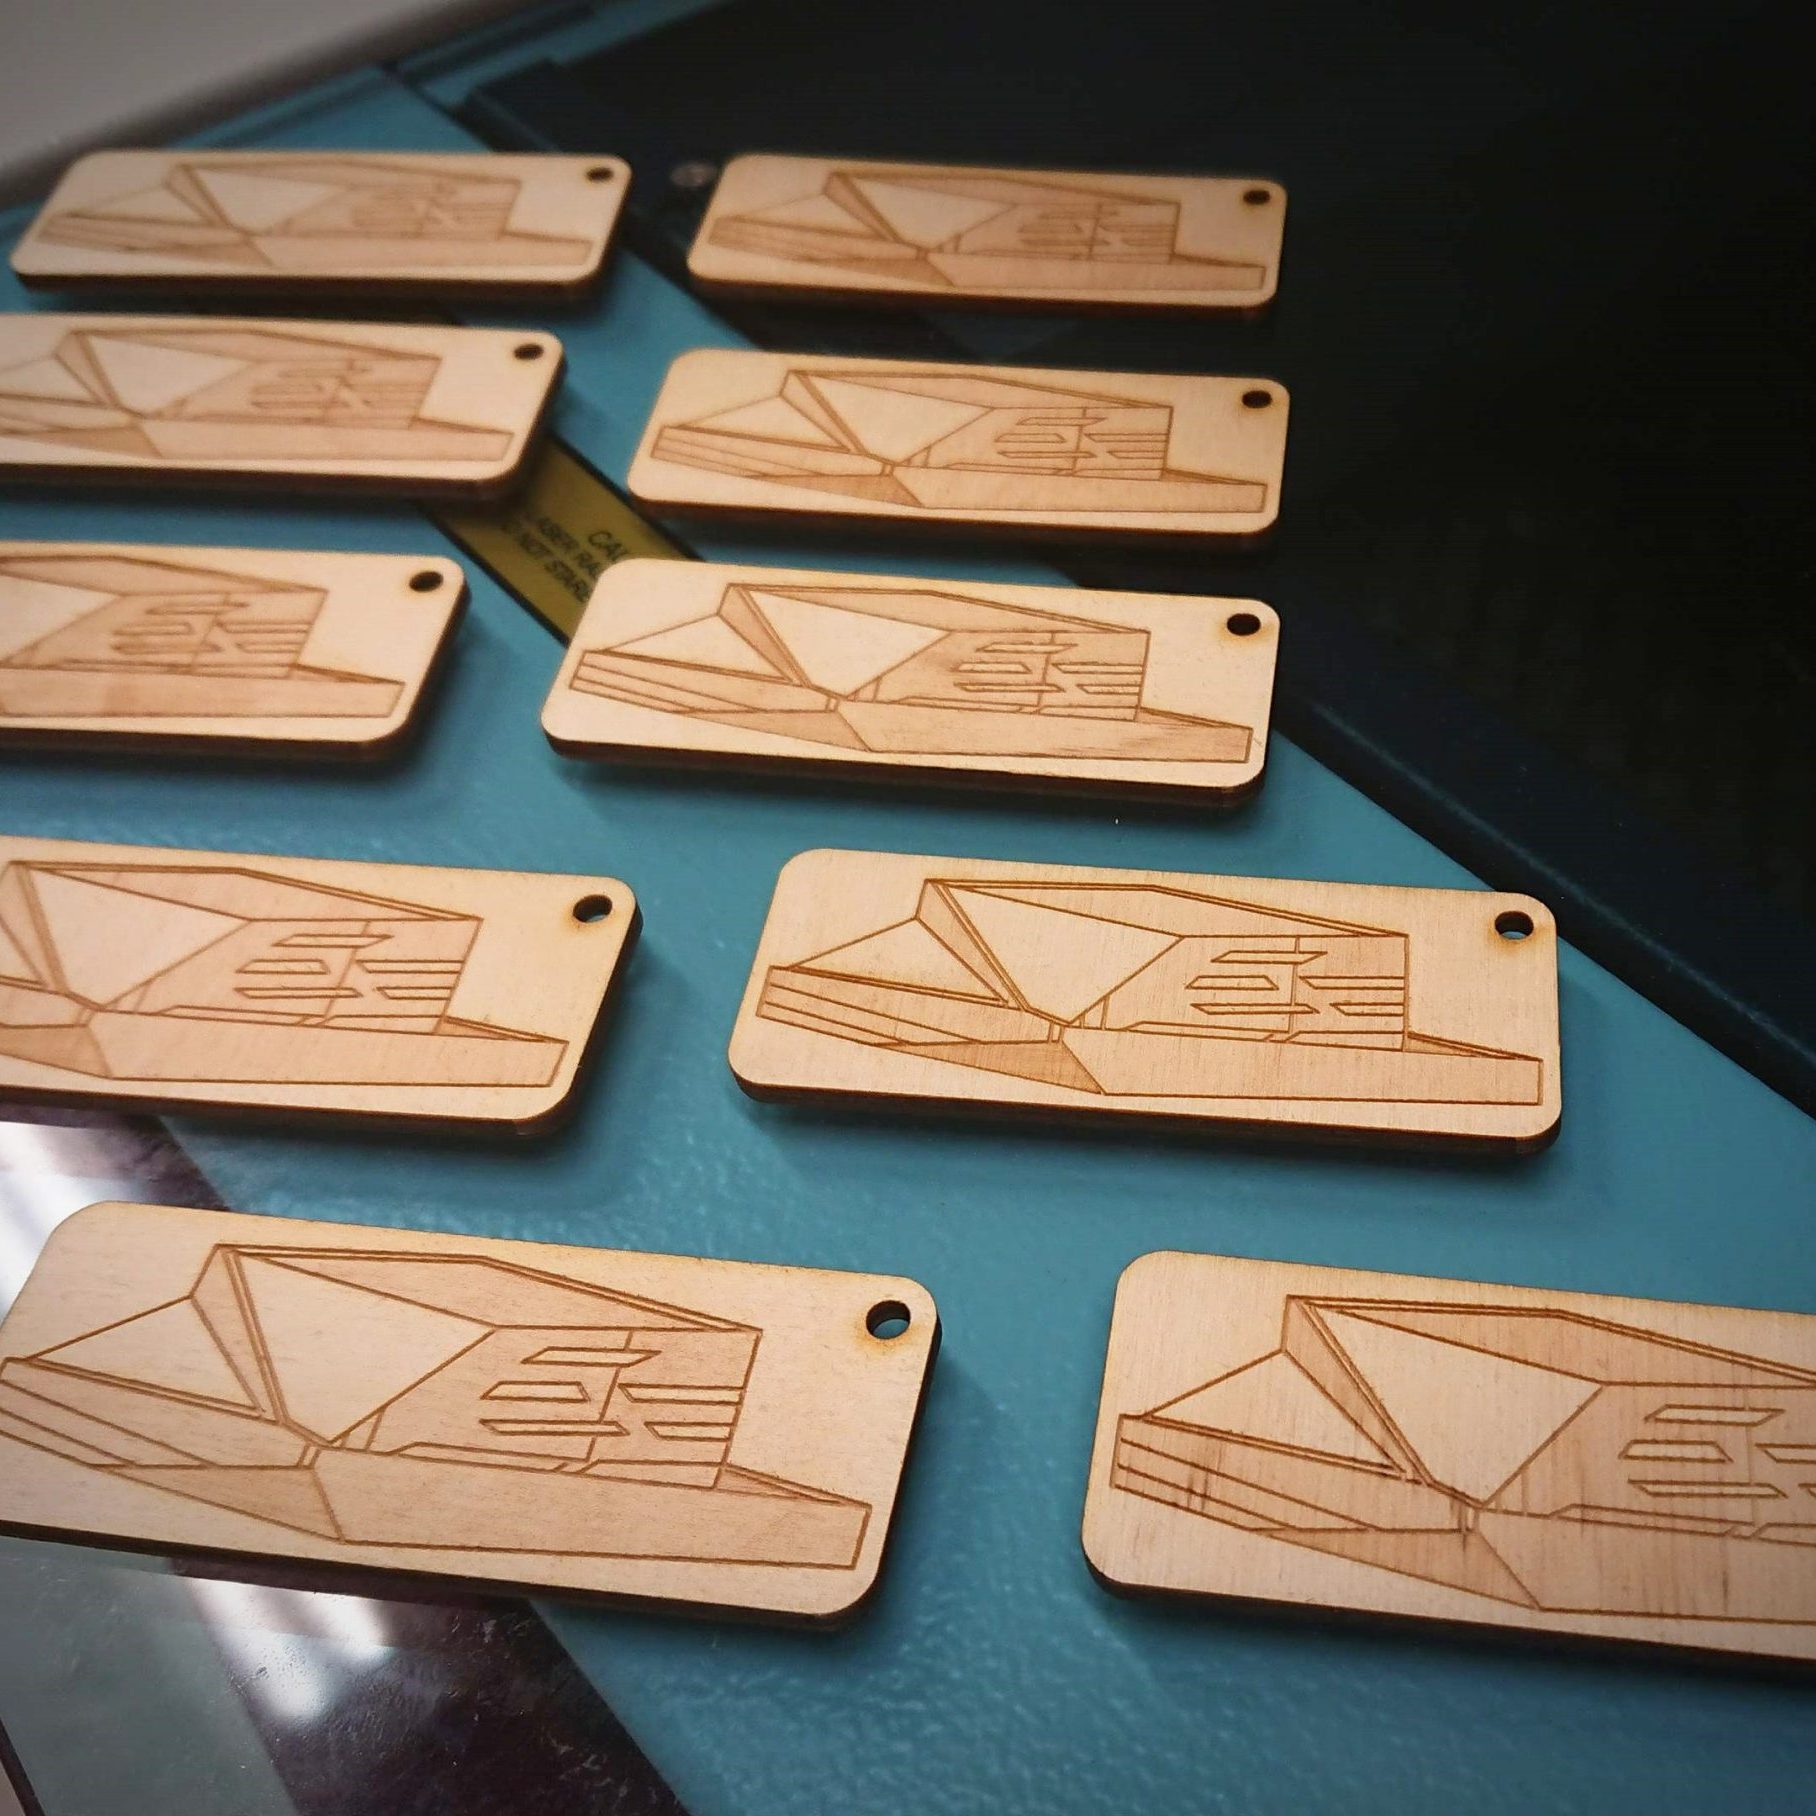 keychains cut with a laser cutter